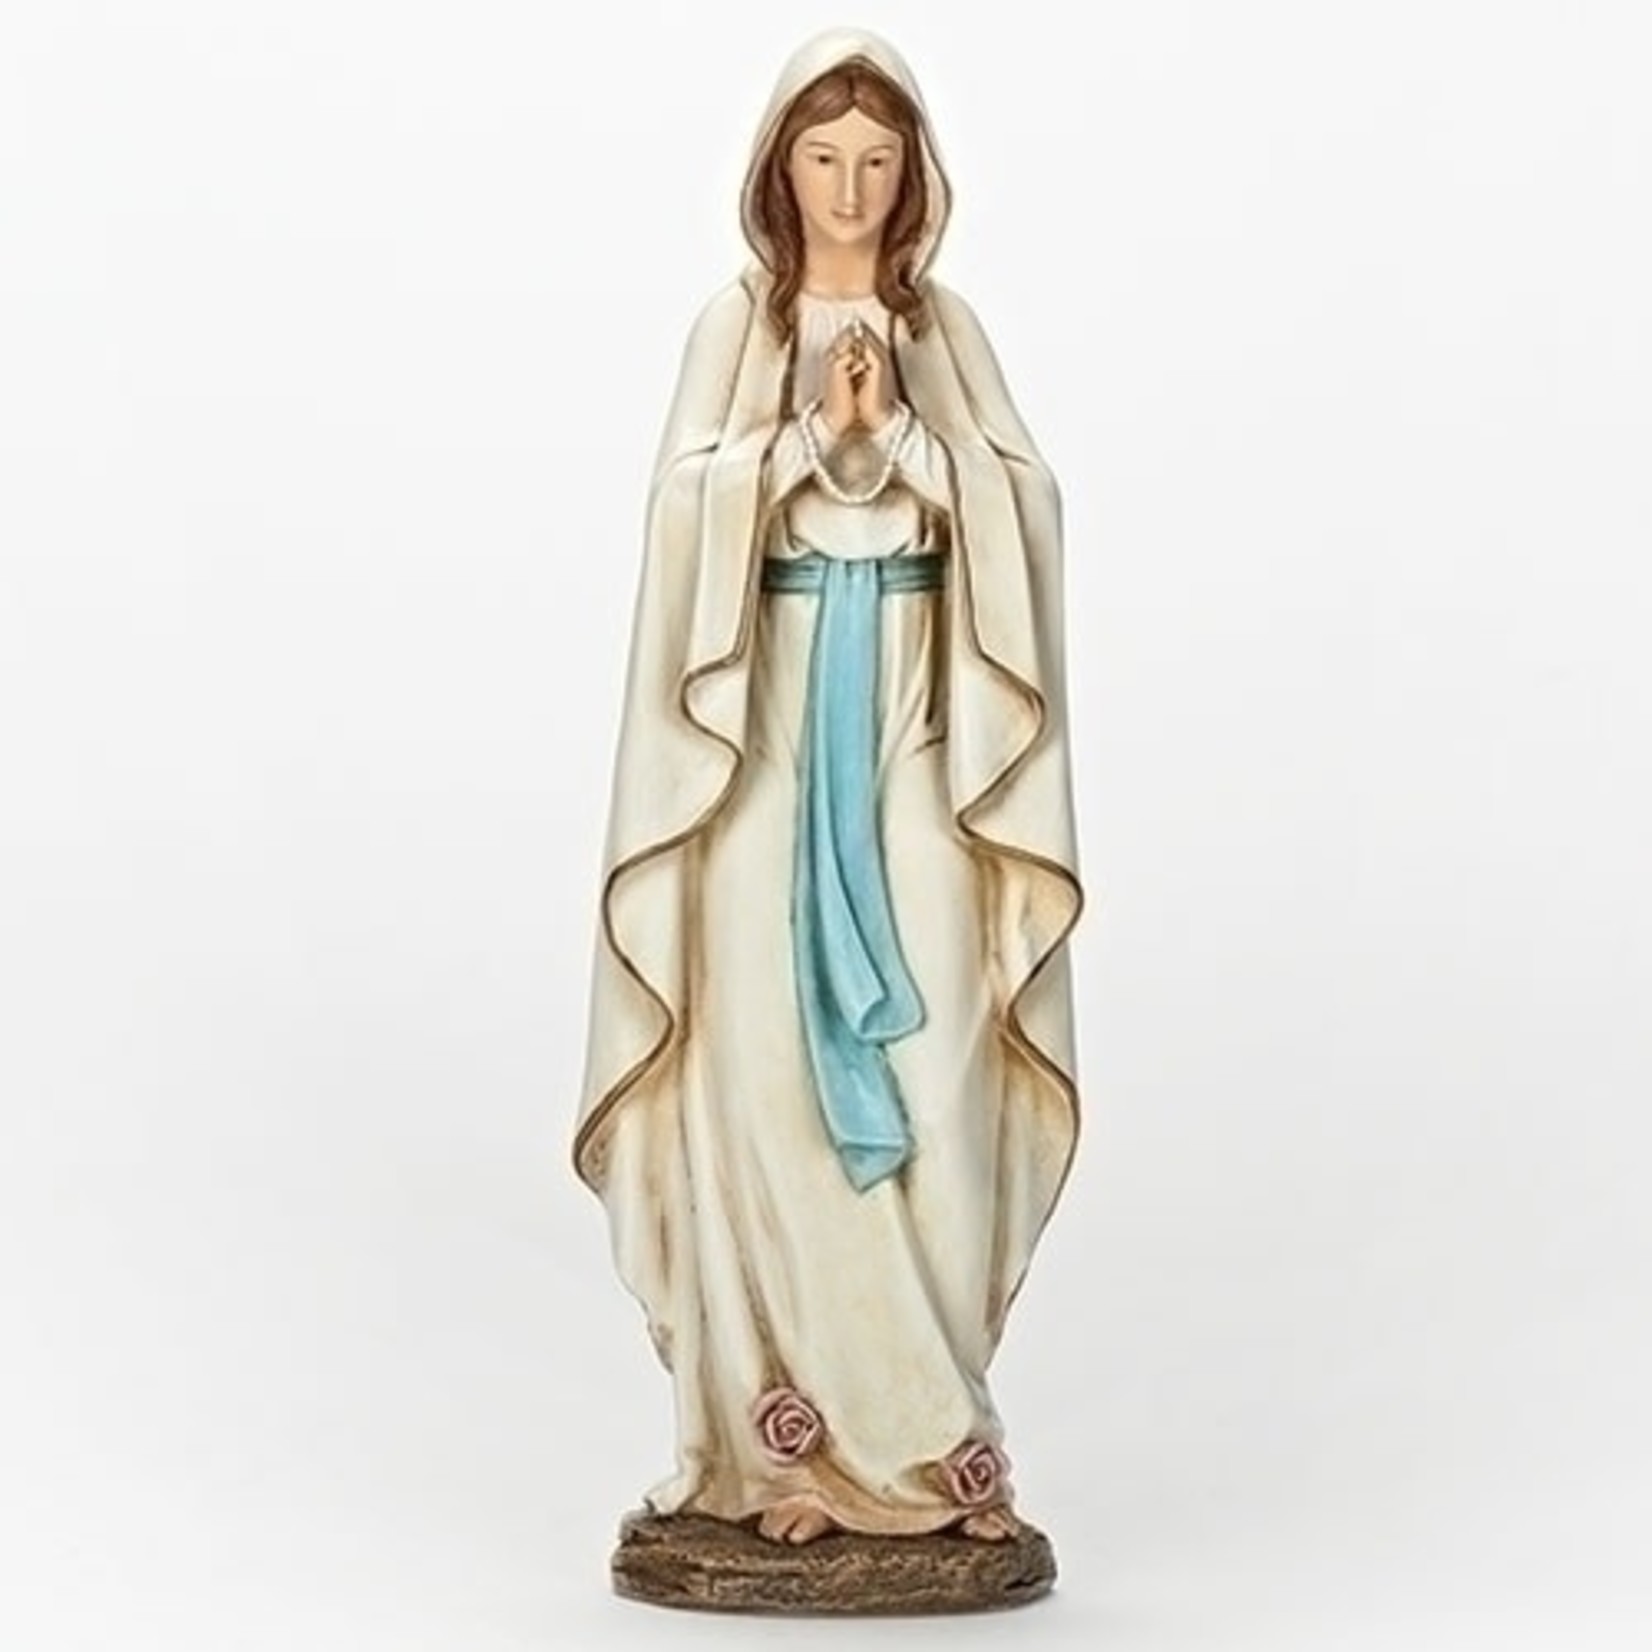 Our Lady of Lourdes 13.5"